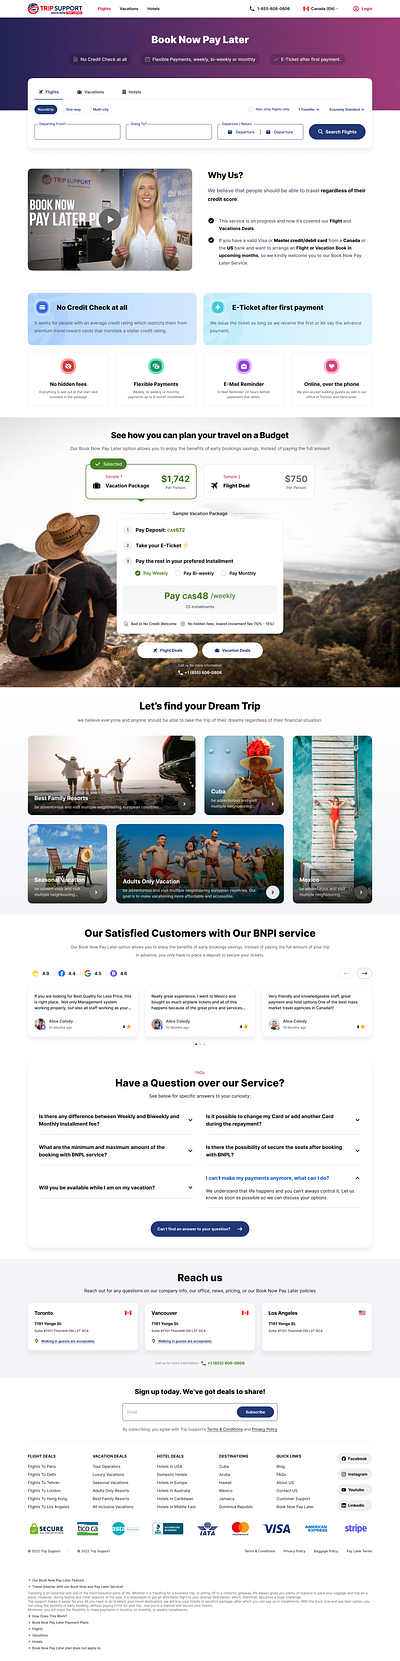 BNPL Landing Page Travel agency bnpl book now pay later minimal travel agency ui uiux user experience user interface